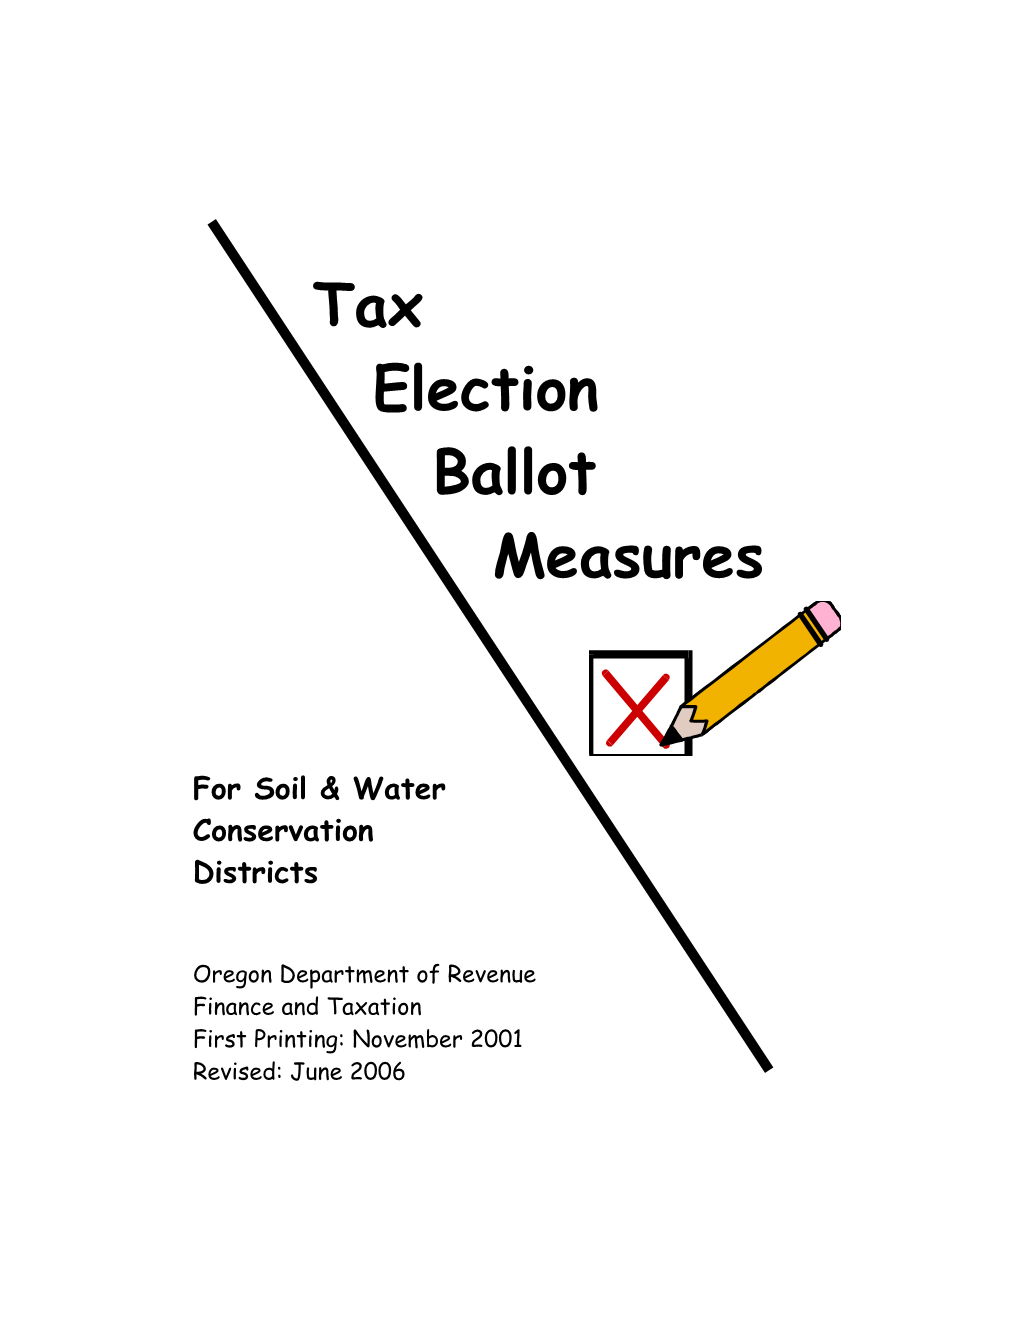 Tax Election Ballot Measures for Swcds